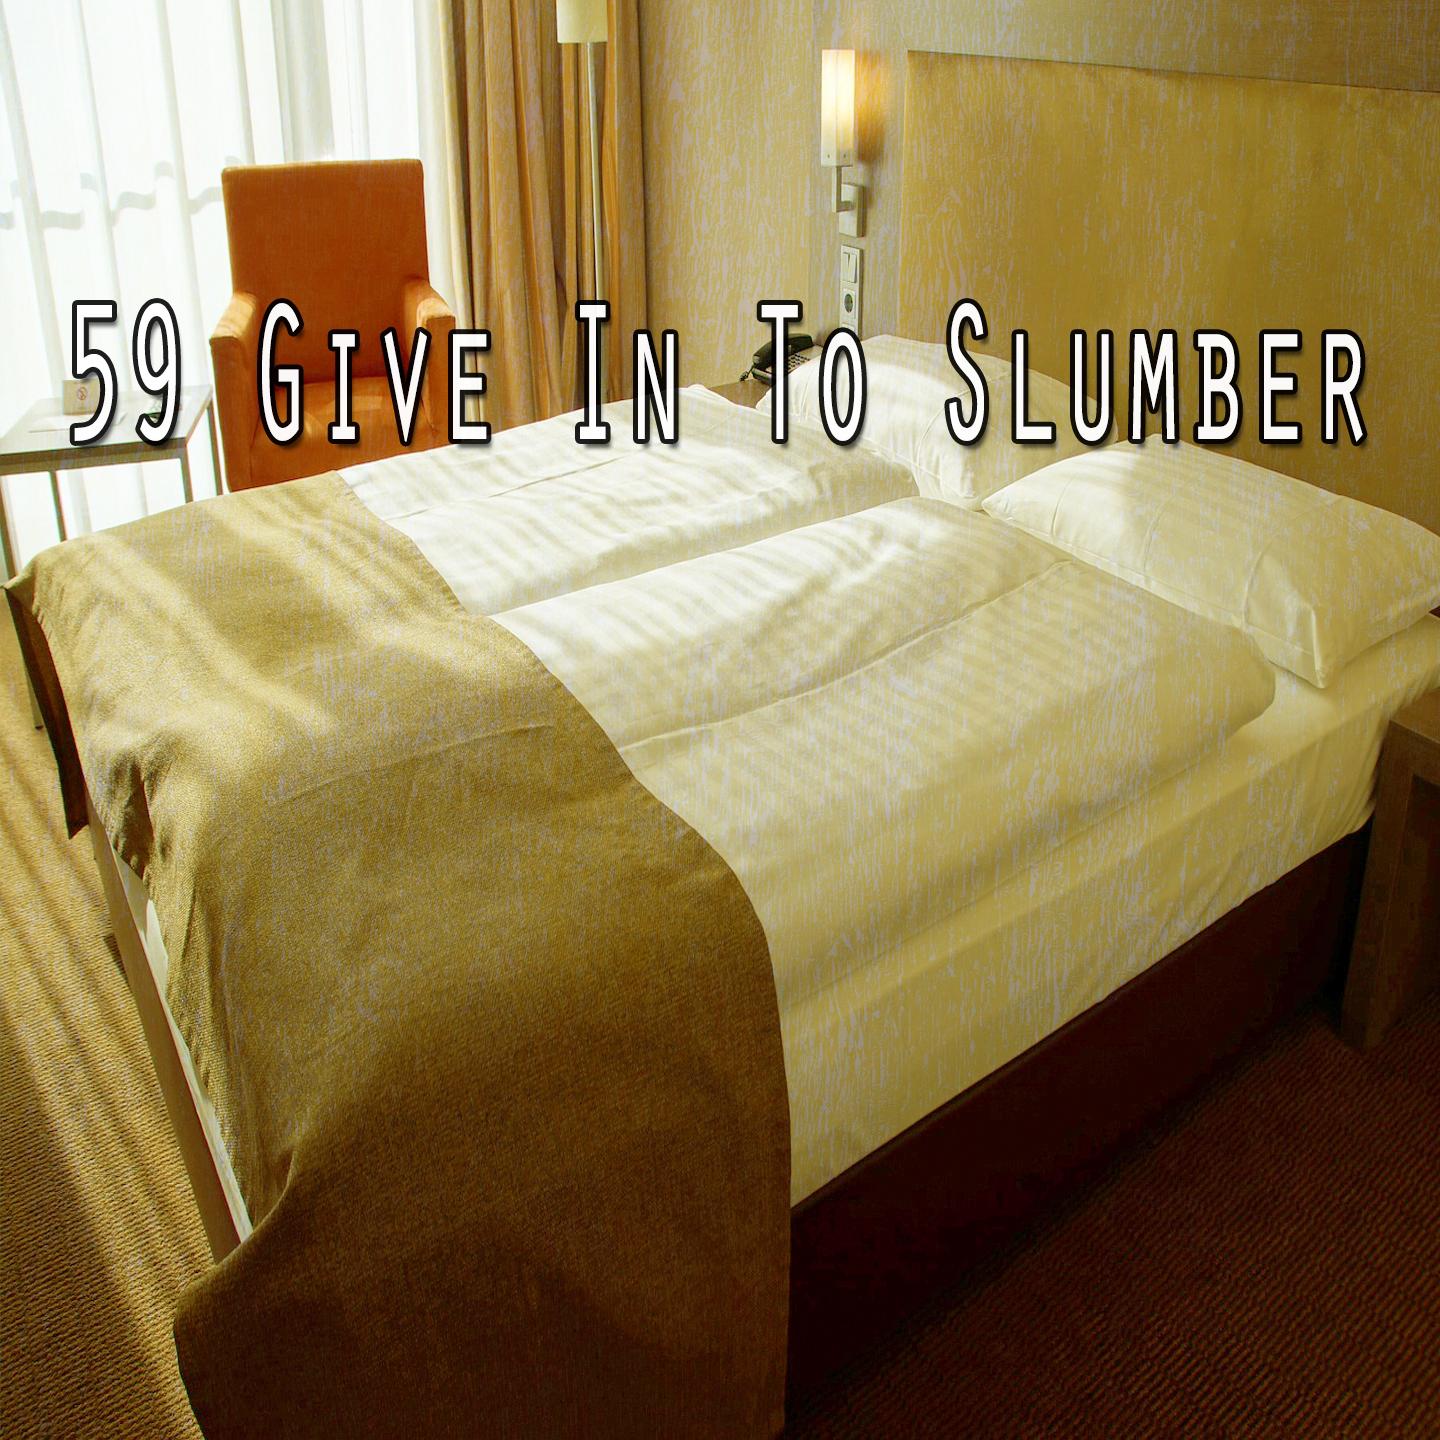 59 Give In to Slumber